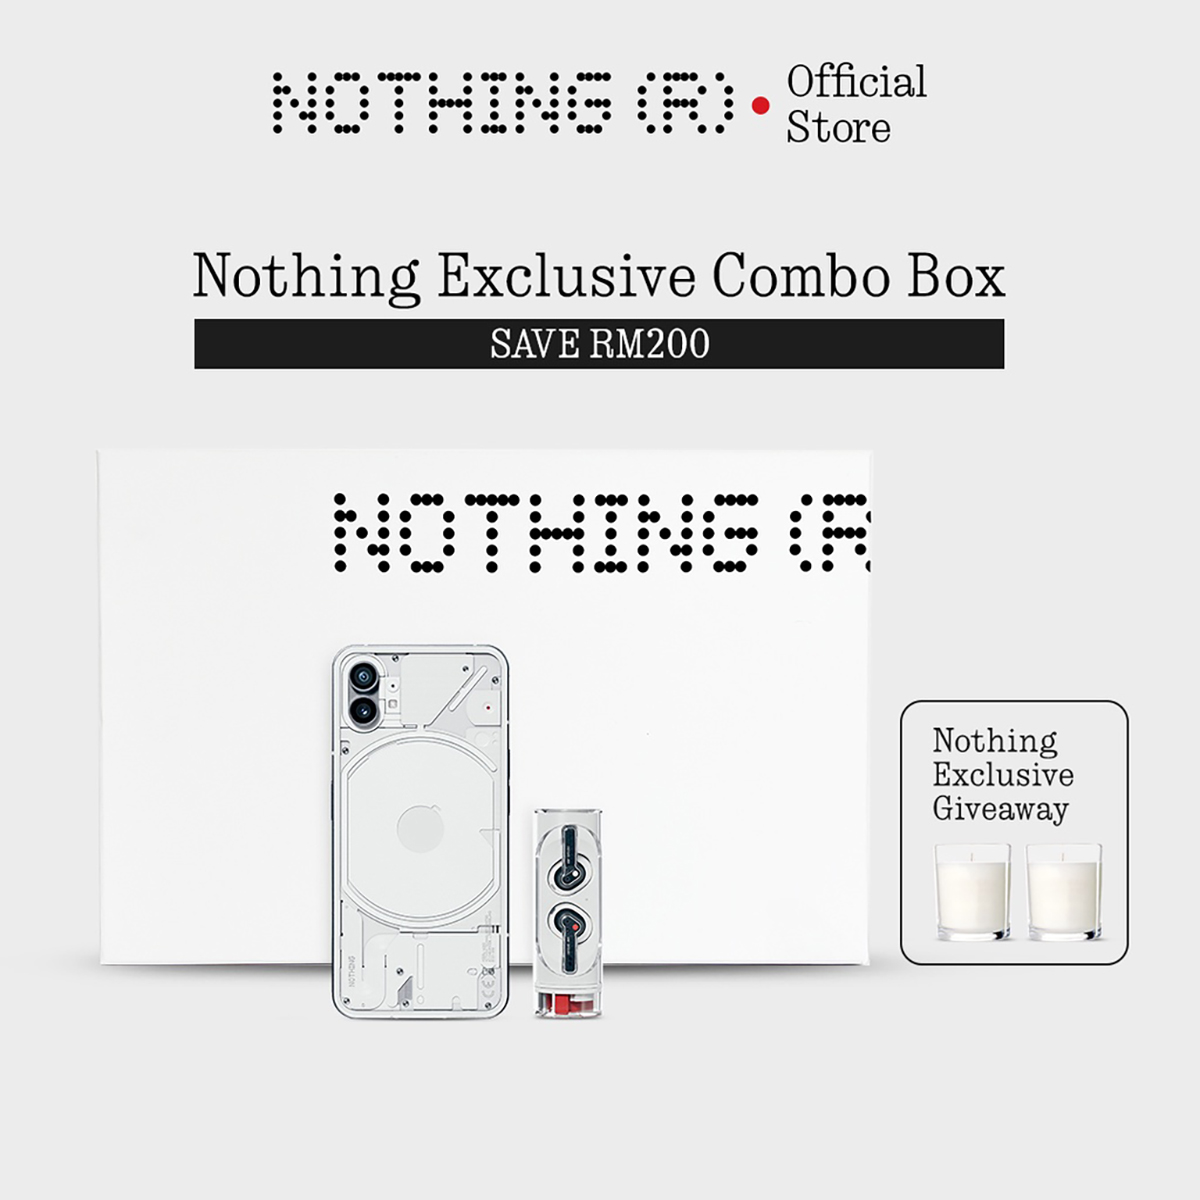 Nothing Singles Day Phone 1 Ear Stick Combo Box price